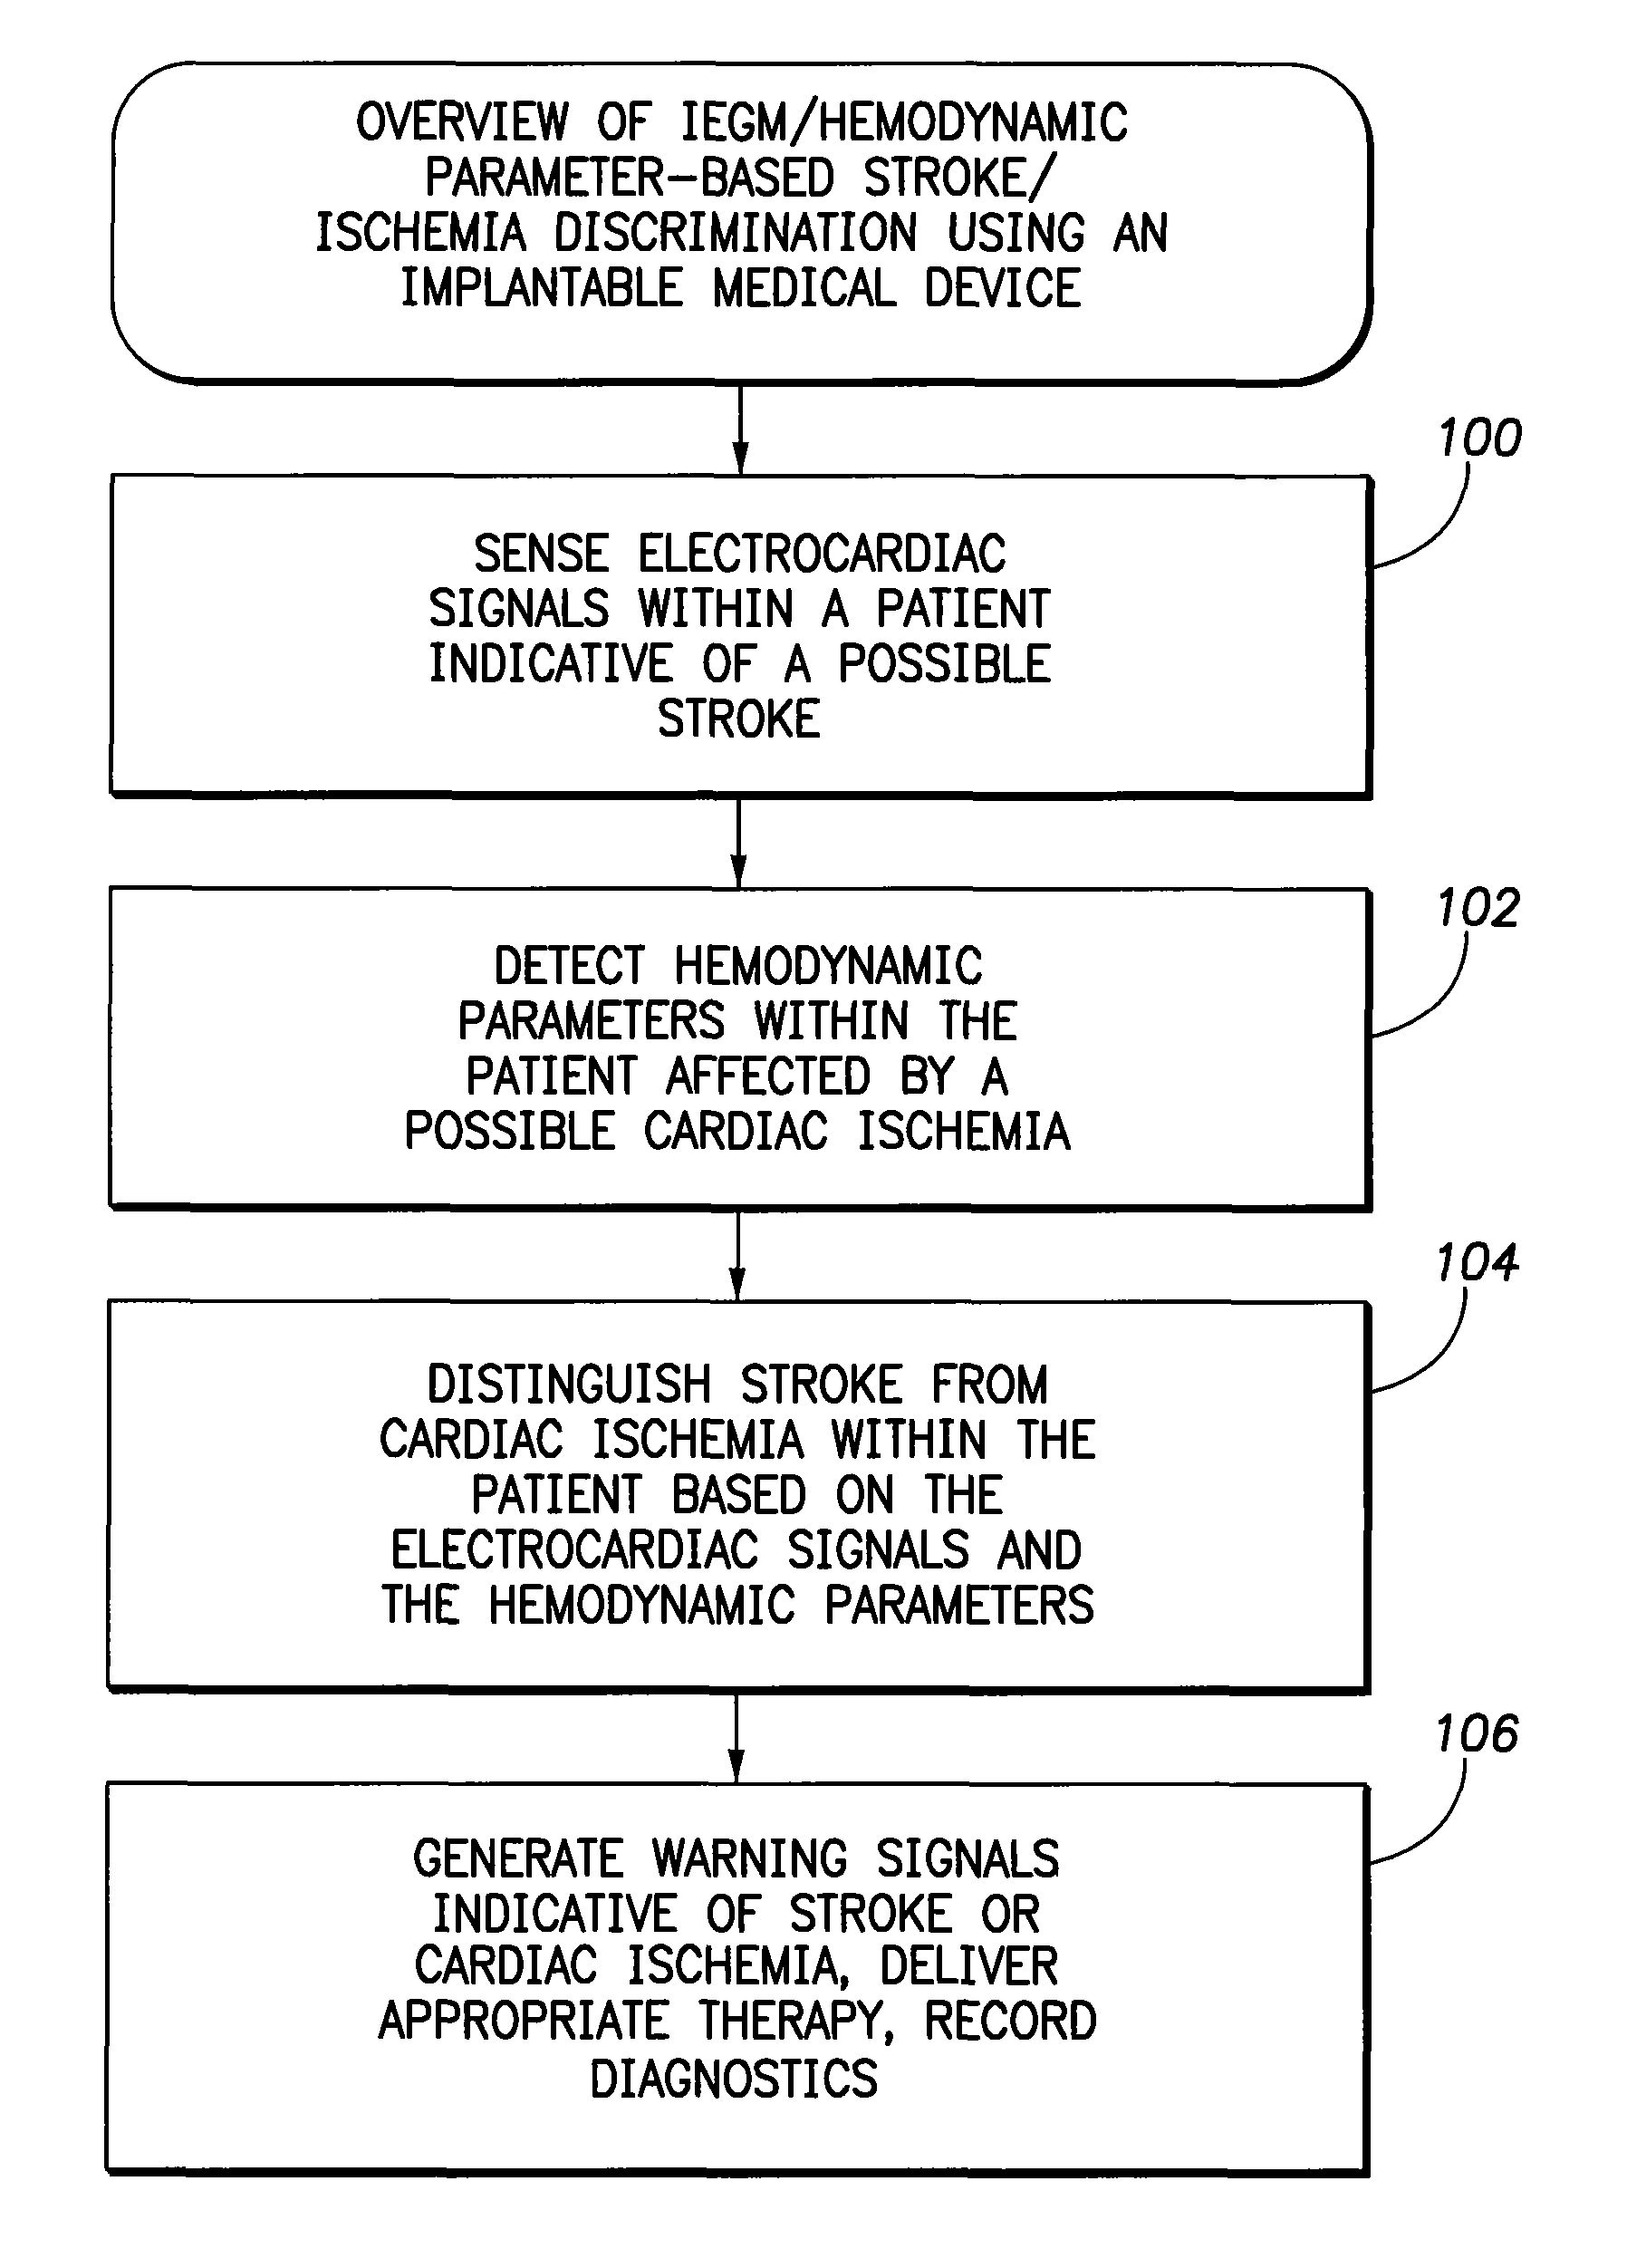 Systems and methods for use by an implantable medical device for detecting and discriminating stroke and cardiac ischemia using electrocardiac signals and hemodynamic parameters